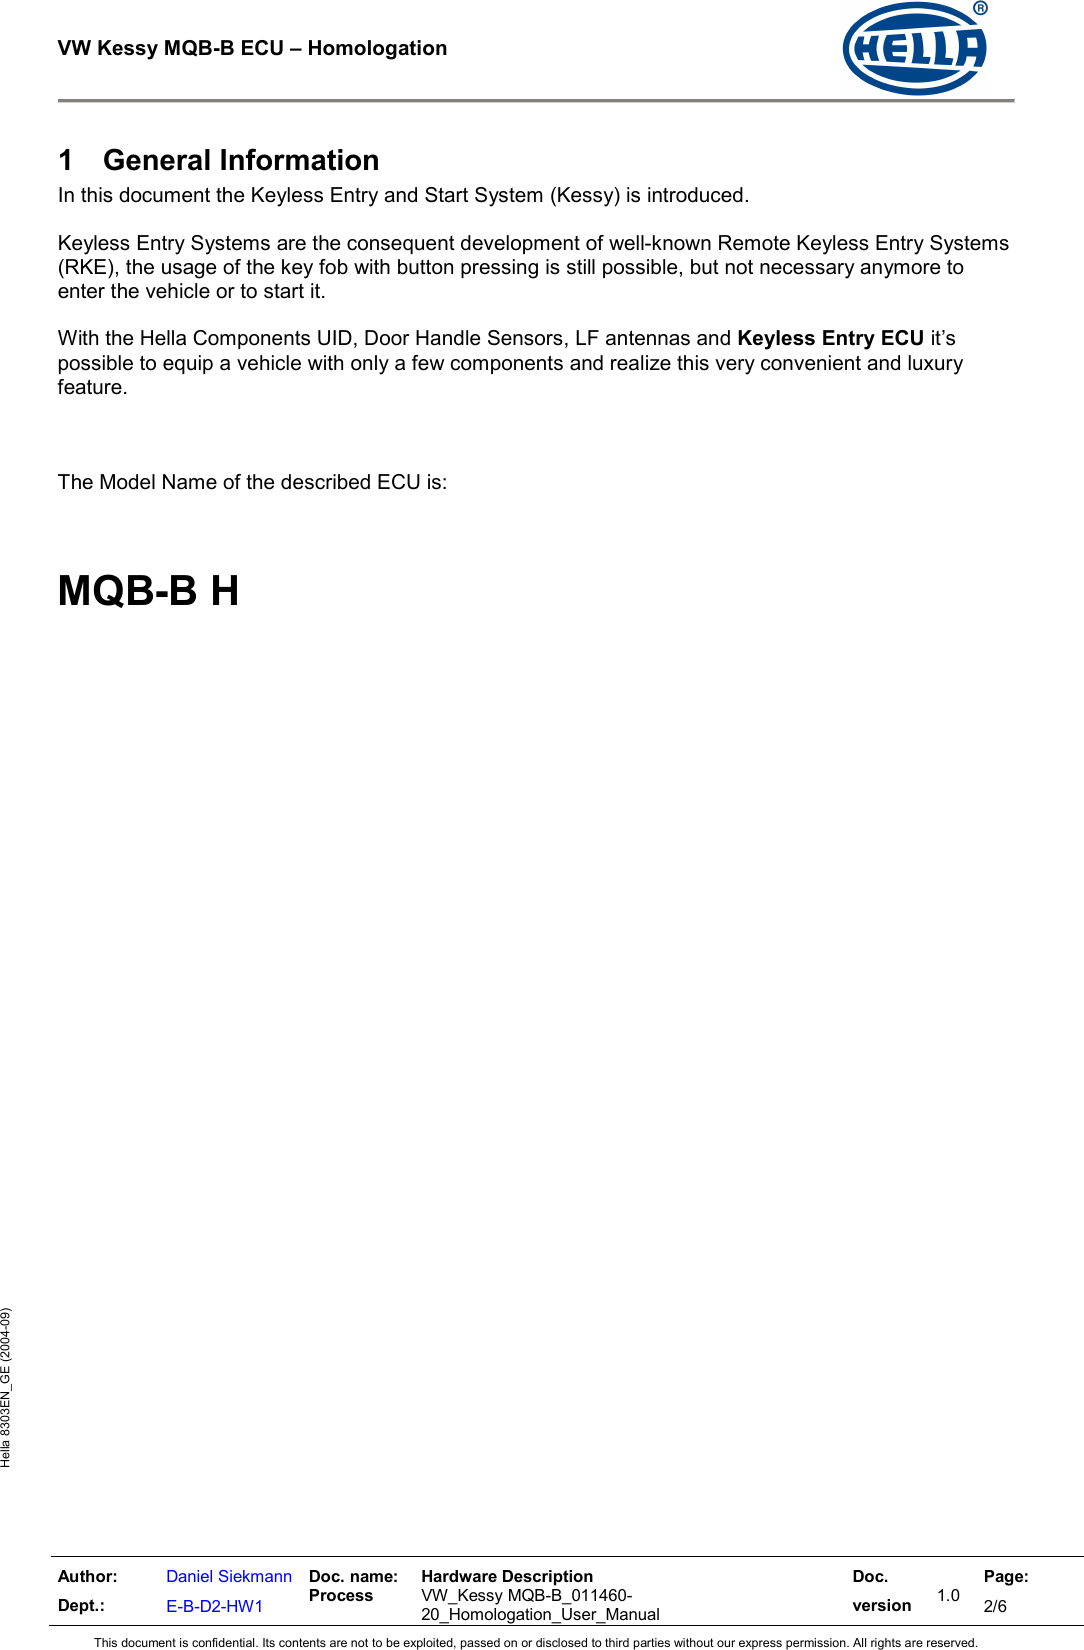  VW Kessy MQB-B ECU – Homologation    Author: Dept.: Daniel Siekmann E-B-D2-HW1 Doc. name: Process Hardware Description  VW_Kessy MQB-B_011460-20_Homologation_User_Manual Doc. version 1.0 Page: 2/6 This document is confidential. Its contents are not to be exploited, passed on or disclosed to third parties without our express permission. All rights are reserved. Hella 8303EN_GE (2004-09) 1  General Information In this document the Keyless Entry and Start System (Kessy) is introduced.  Keyless Entry Systems are the consequent development of well-known Remote Keyless Entry Systems (RKE), the usage of the key fob with button pressing is still possible, but not necessary anymore to enter the vehicle or to start it.  With the Hella Components UID, Door Handle Sensors, LF antennas and Keyless Entry ECU it’s possible to equip a vehicle with only a few components and realize this very convenient and luxury feature.    The Model Name of the described ECU is:    MQB-B H    